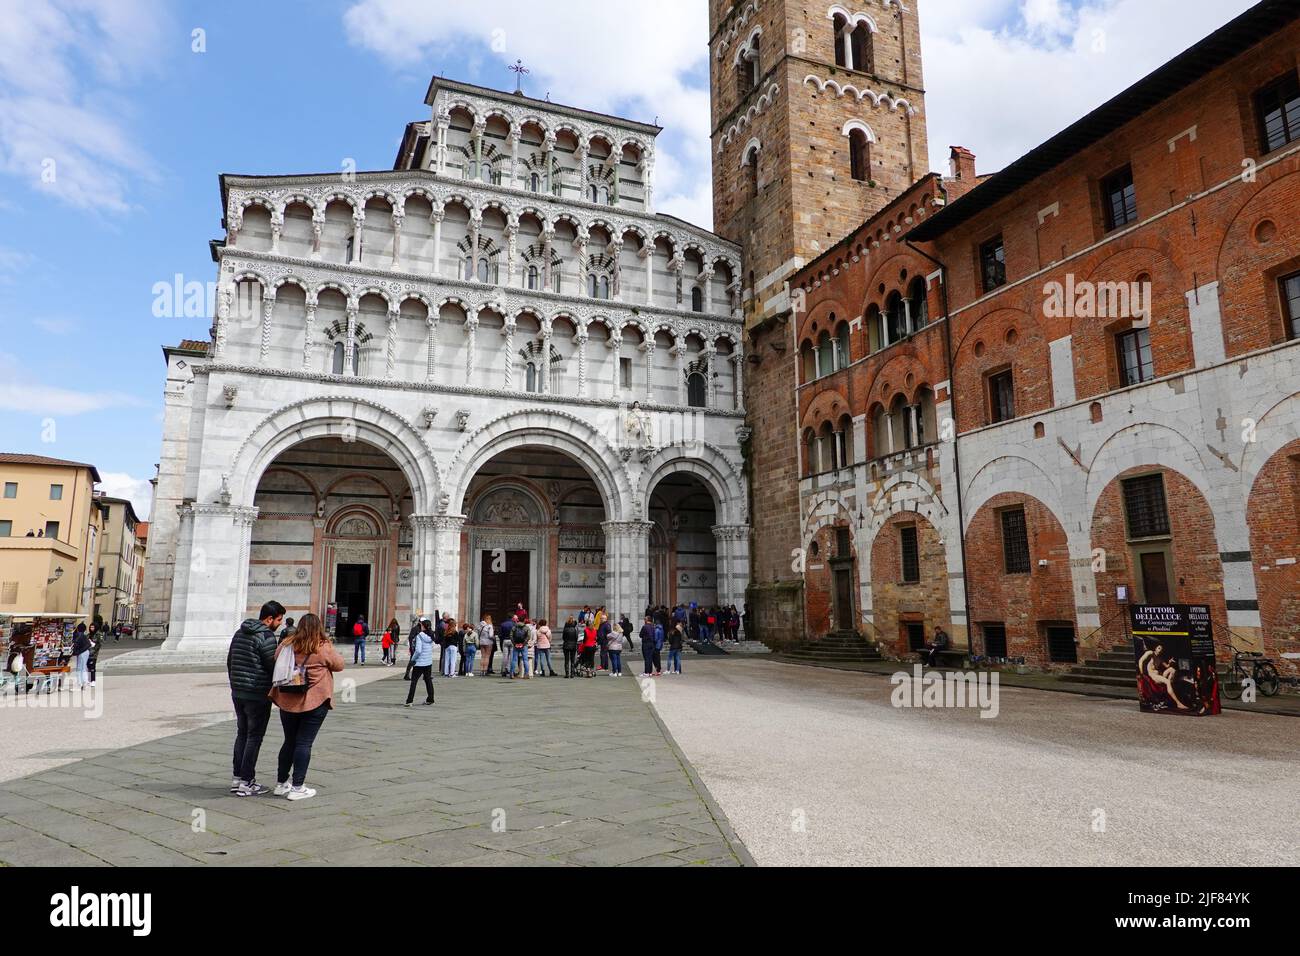 People in the Piazza San Martino in front of the Duomo of Luca, Italy, a part of Tuscany. Stock Photo